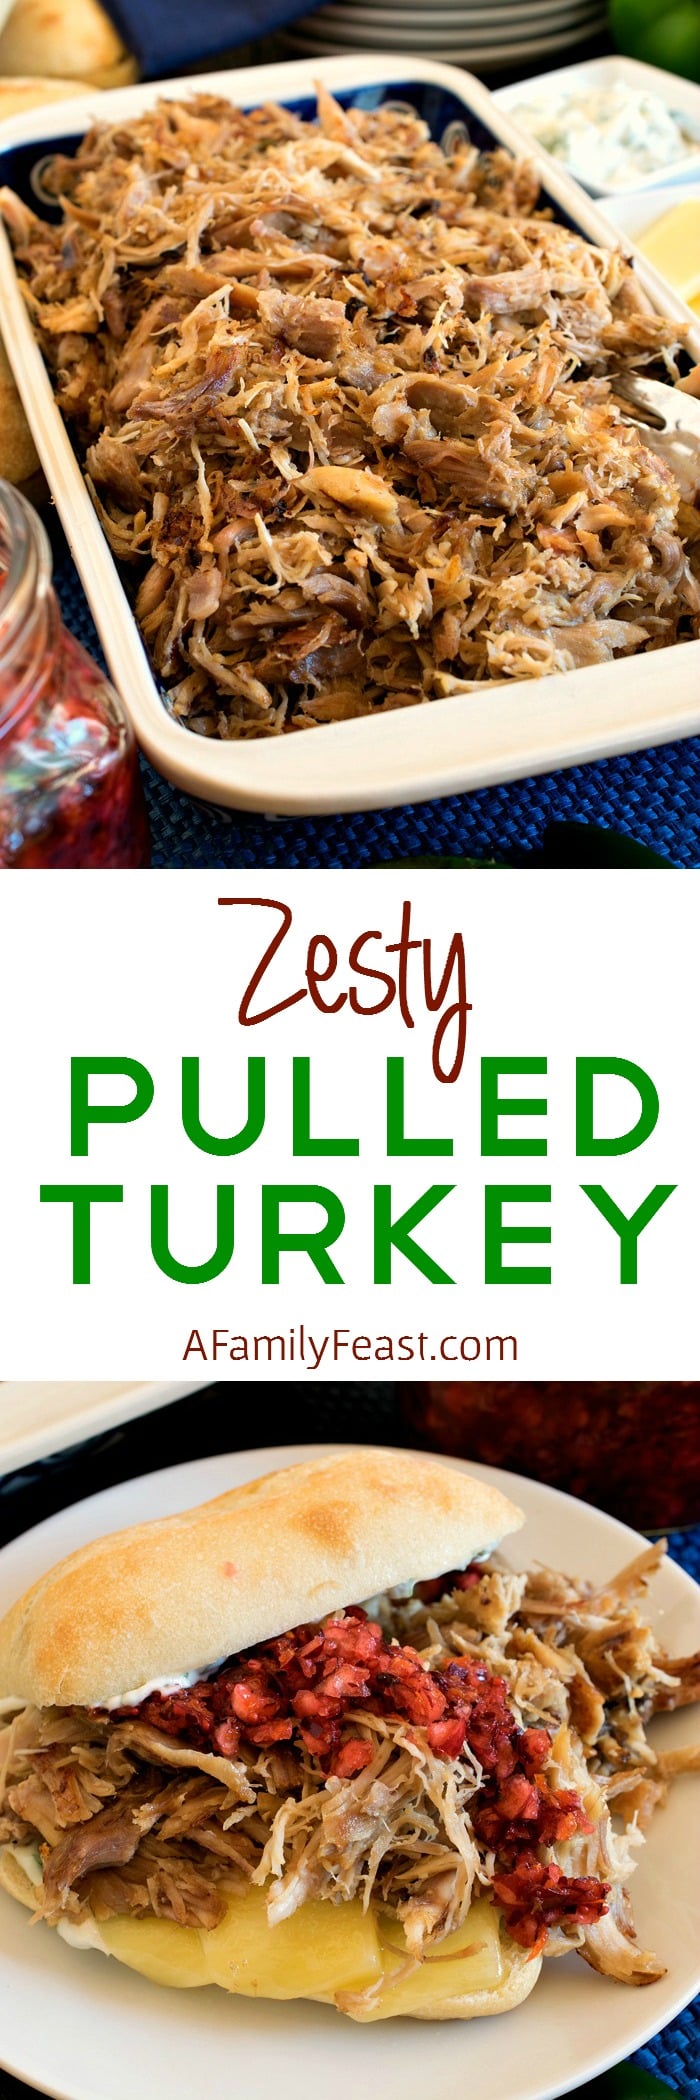 Zesty Pulled Turkey - A delicious recipe made with leftover turkey. Use on sliders, in tacos, quesadillas and more!